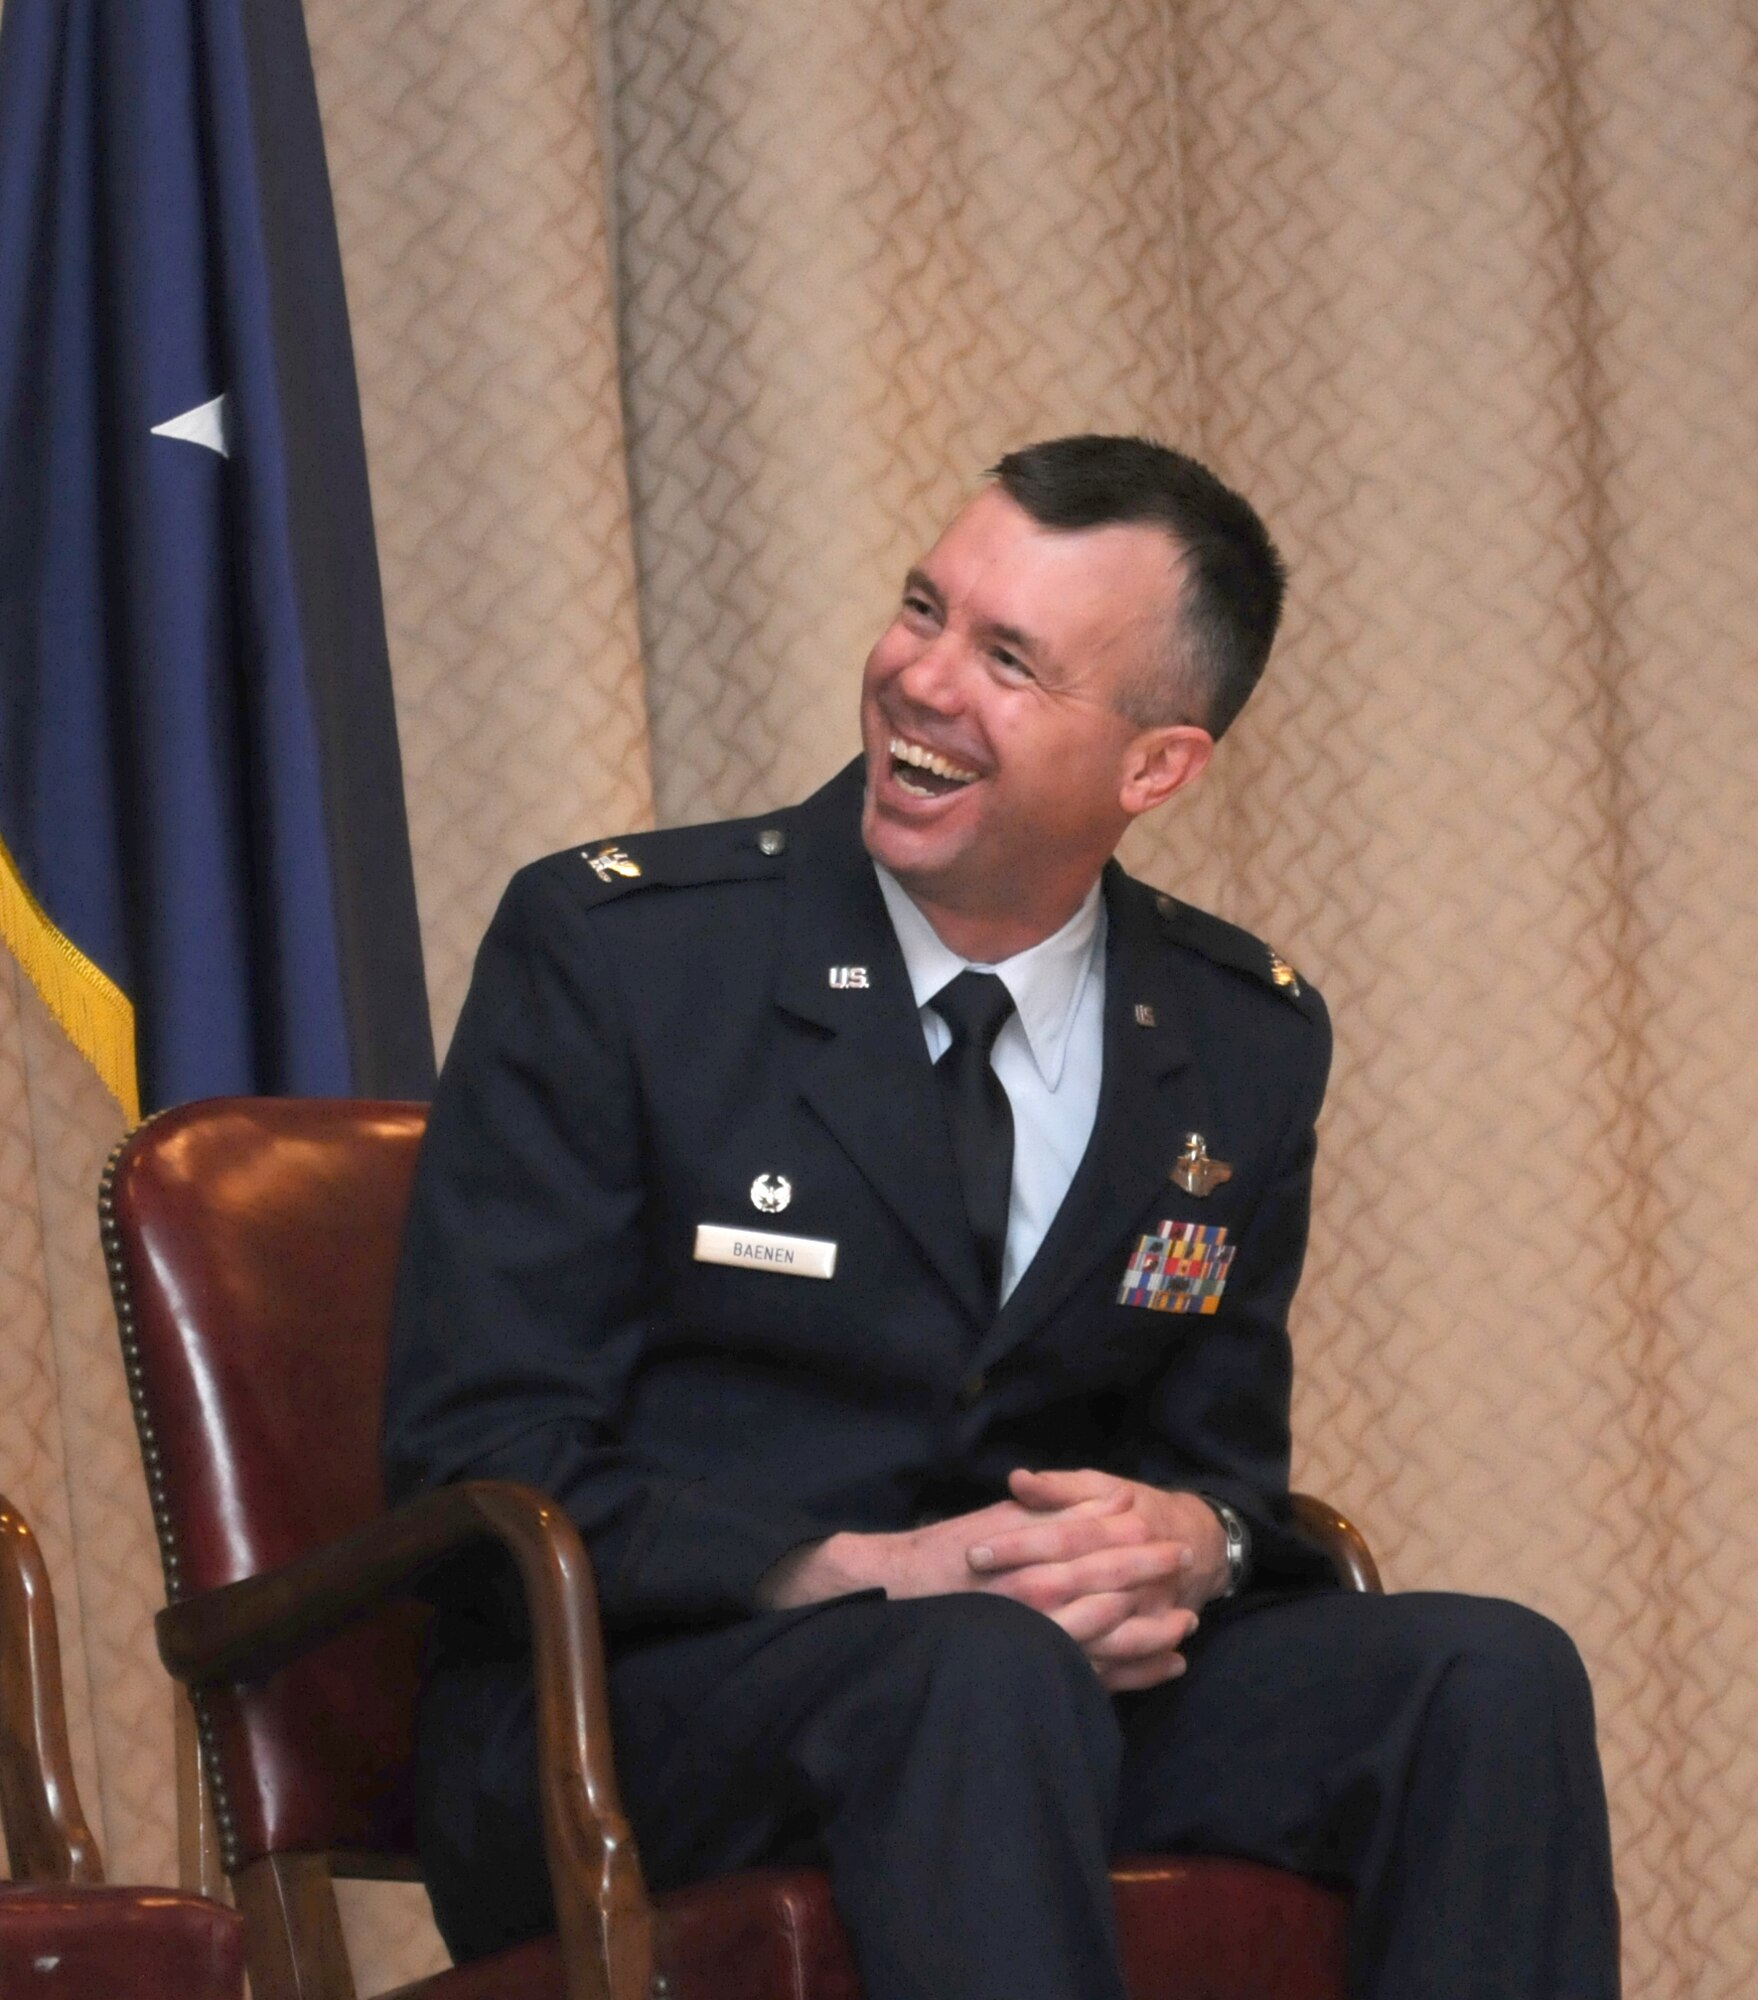 Col. Jeremy O. Baenen wears his signature ear-to-ear grin during one of many laughs during his retirement ceremony, Nov. 21, 2014 at Kingsley Field in Klamath Falls, Ore. He related in his remarks that maintaining a sense of humor is an integral part of his leadership style. (U.S. Air National Guard photo by Tech. Sgt. Jefferson Thompson/Released)